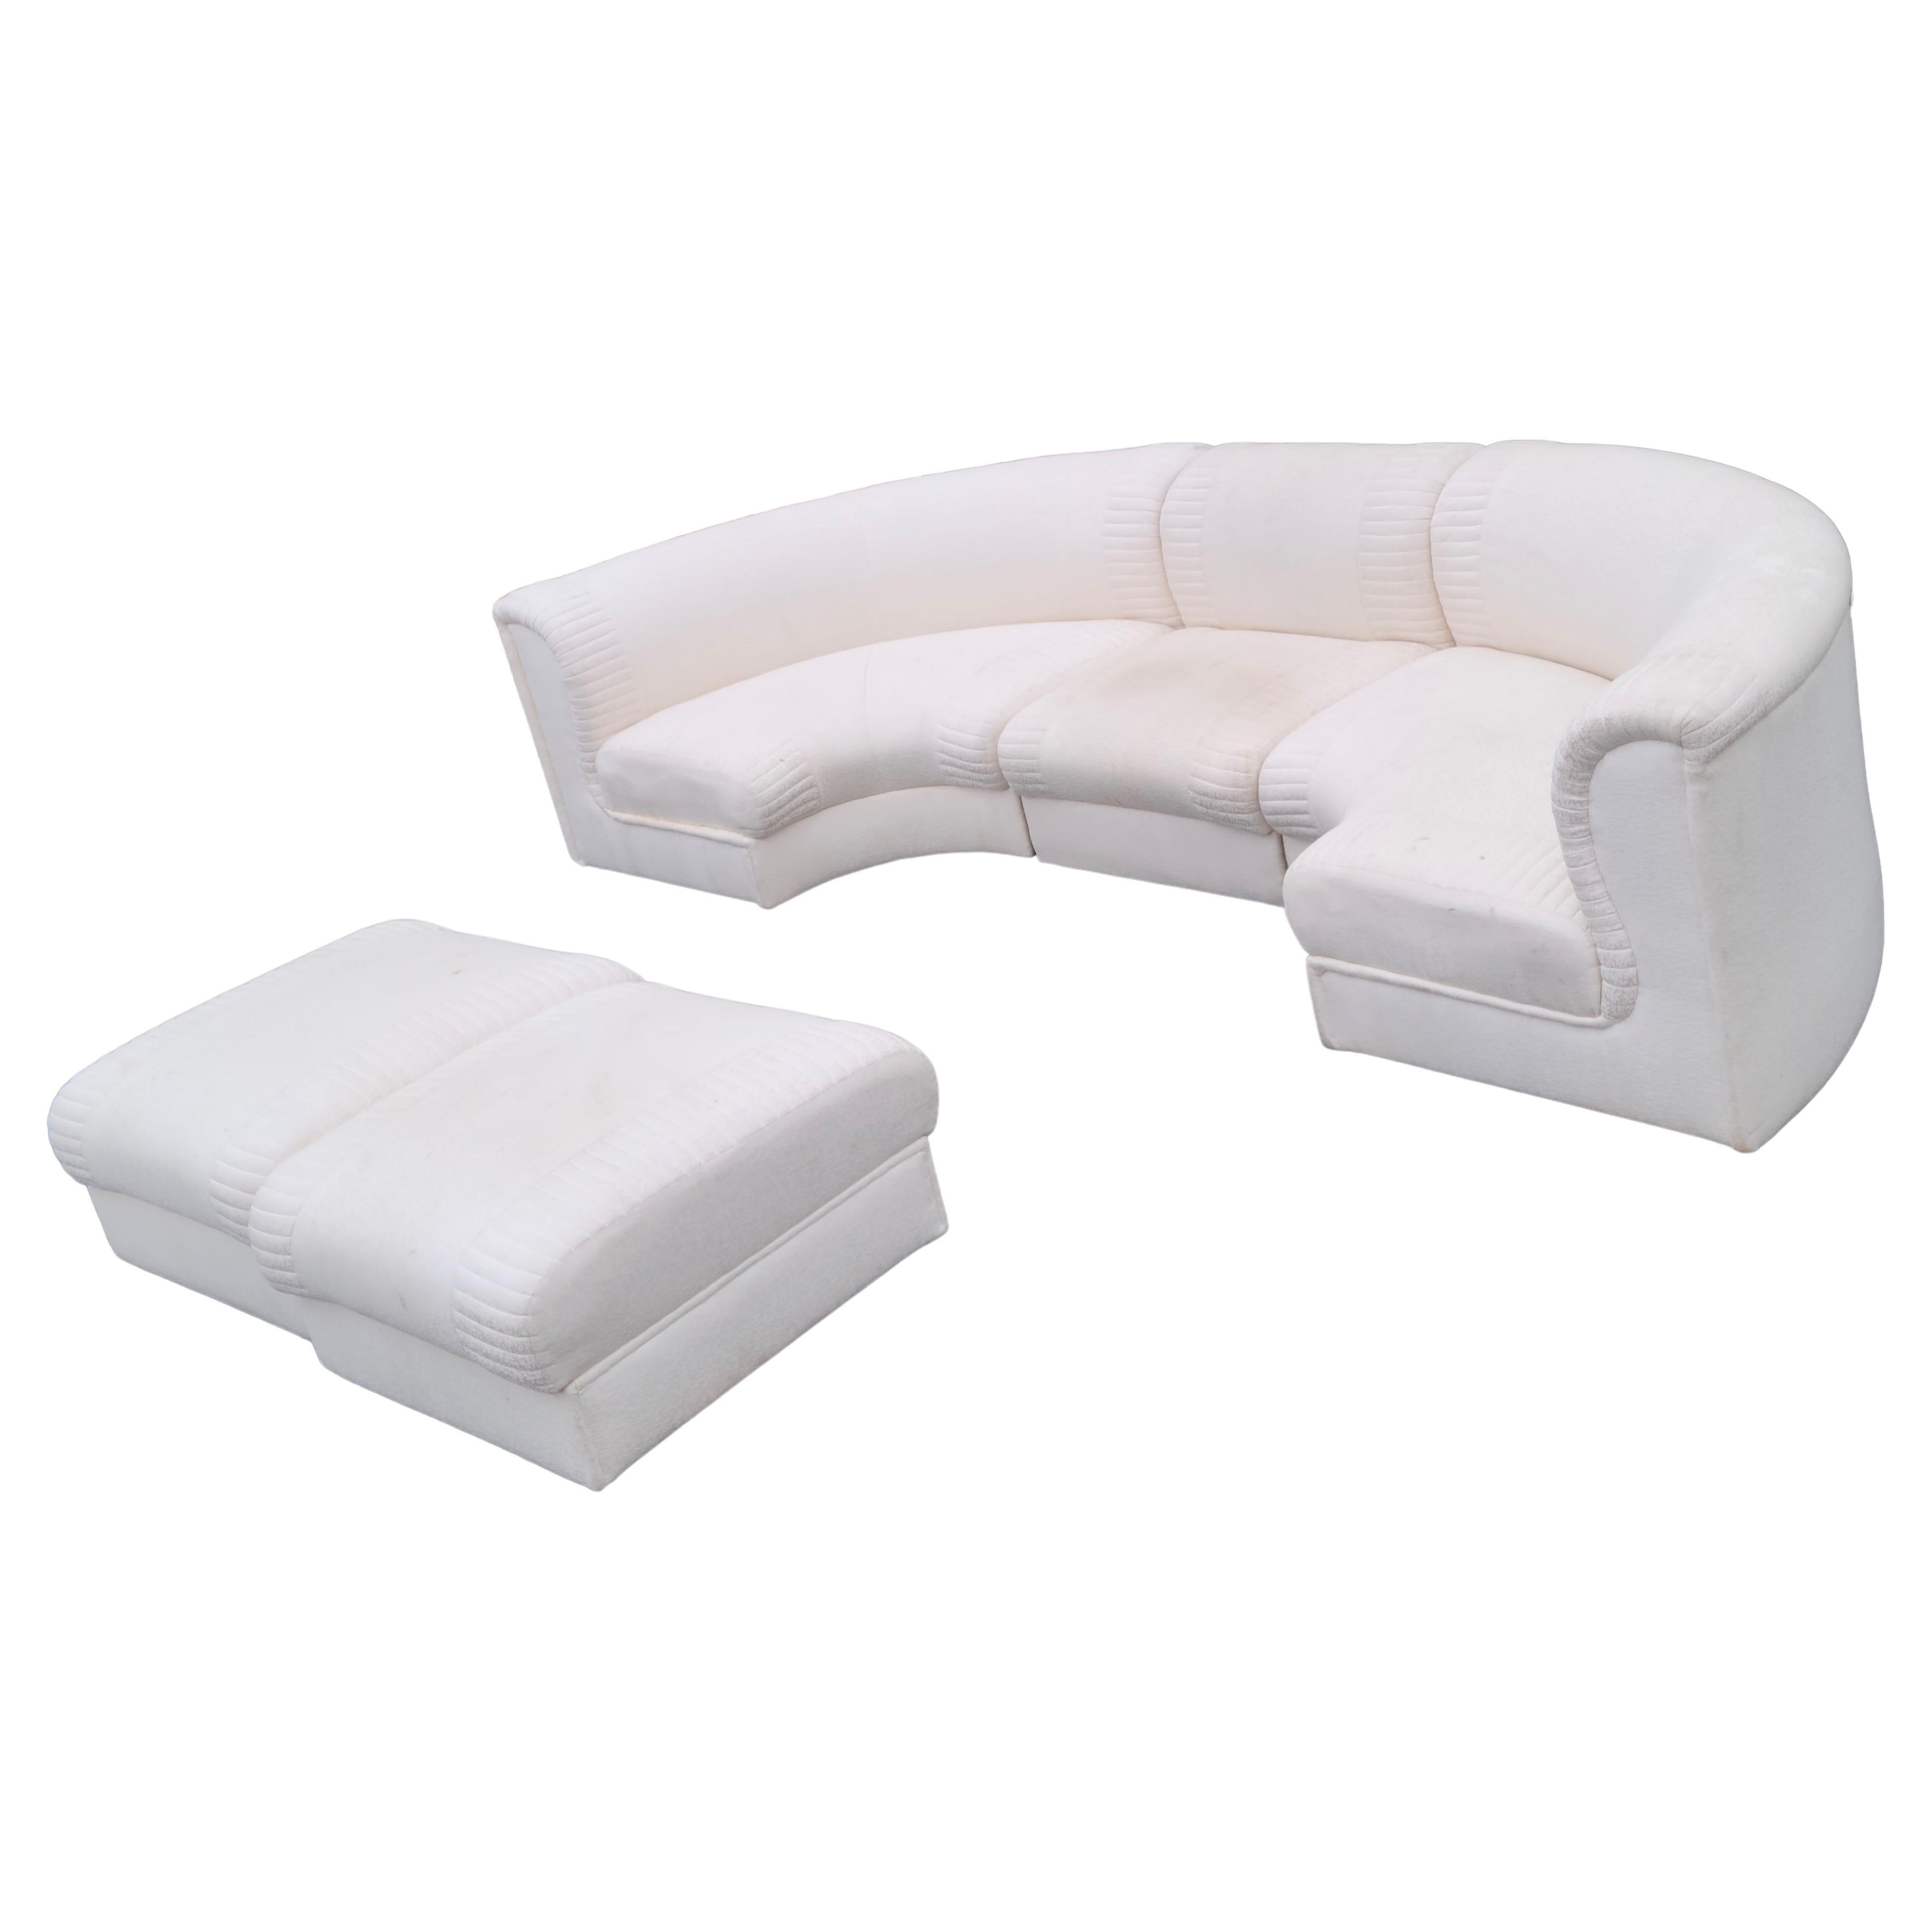 Serpentine sectional sofa by Weiman style of Kagan 2